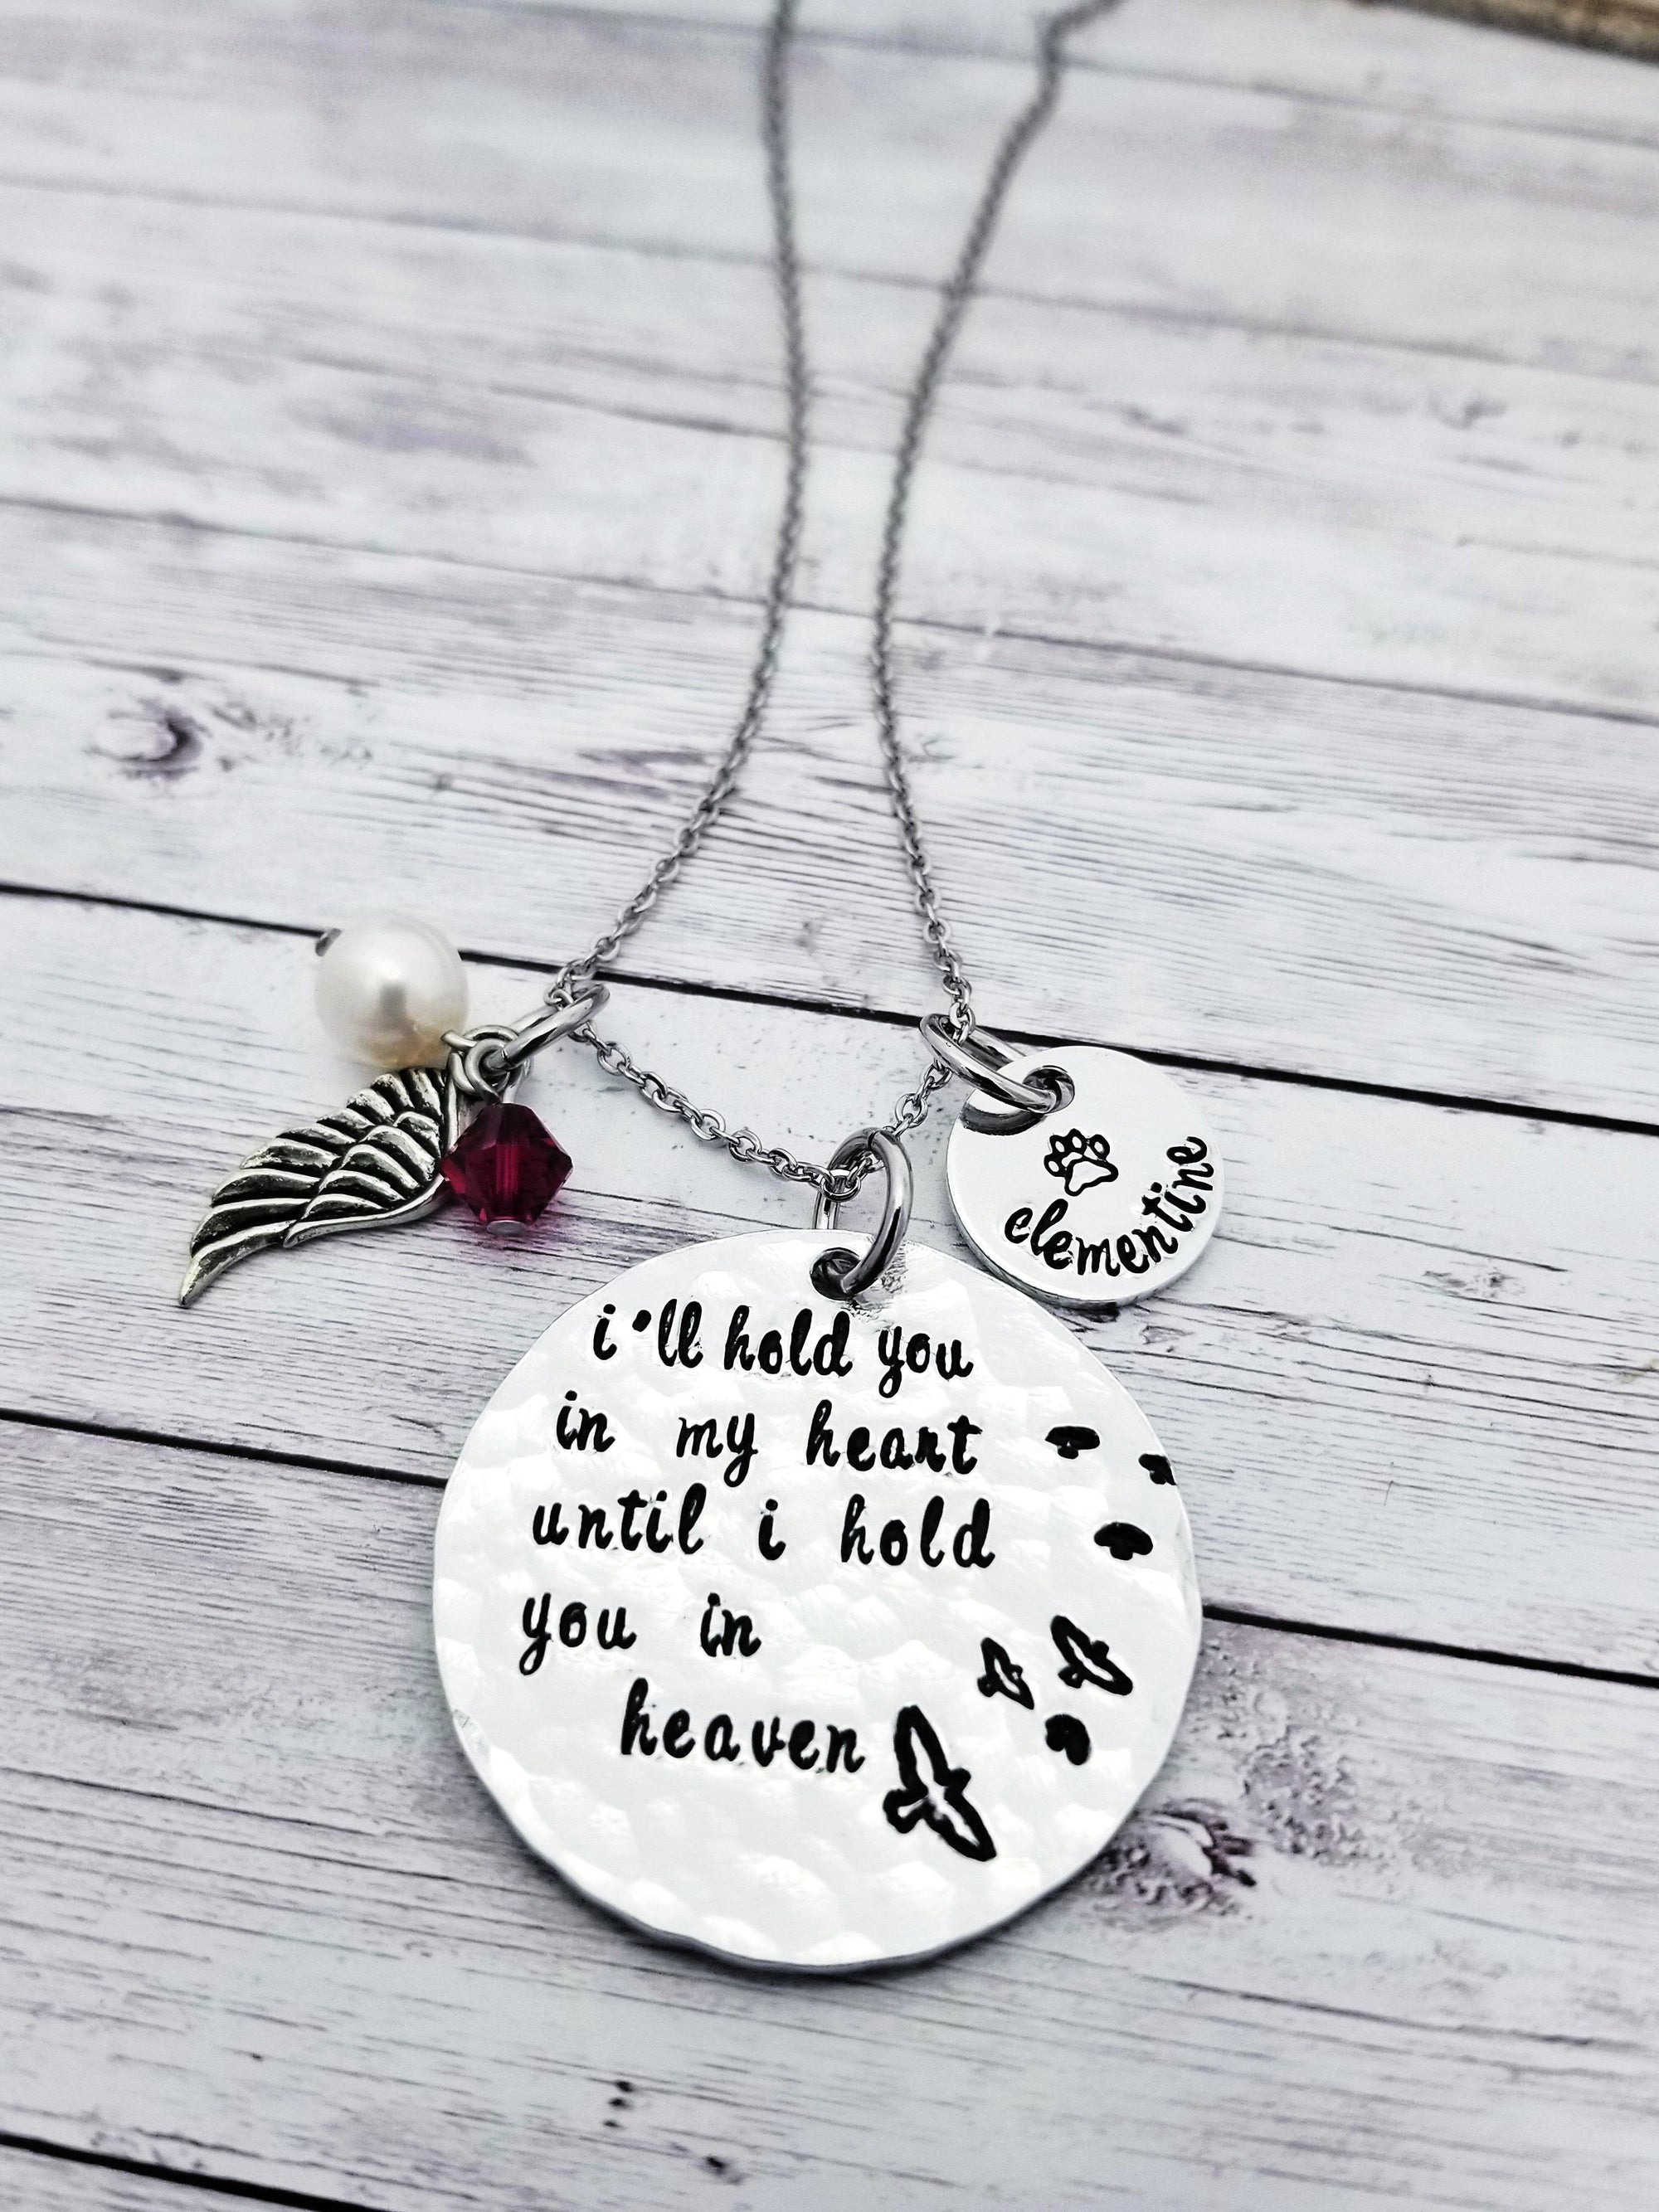 Memorial Necklace, Remembrance Jewelry, Grieving Gift, Hold You In My Heart, Infant Loss, Child Loss, Miscarriage, Still Birth, Lost